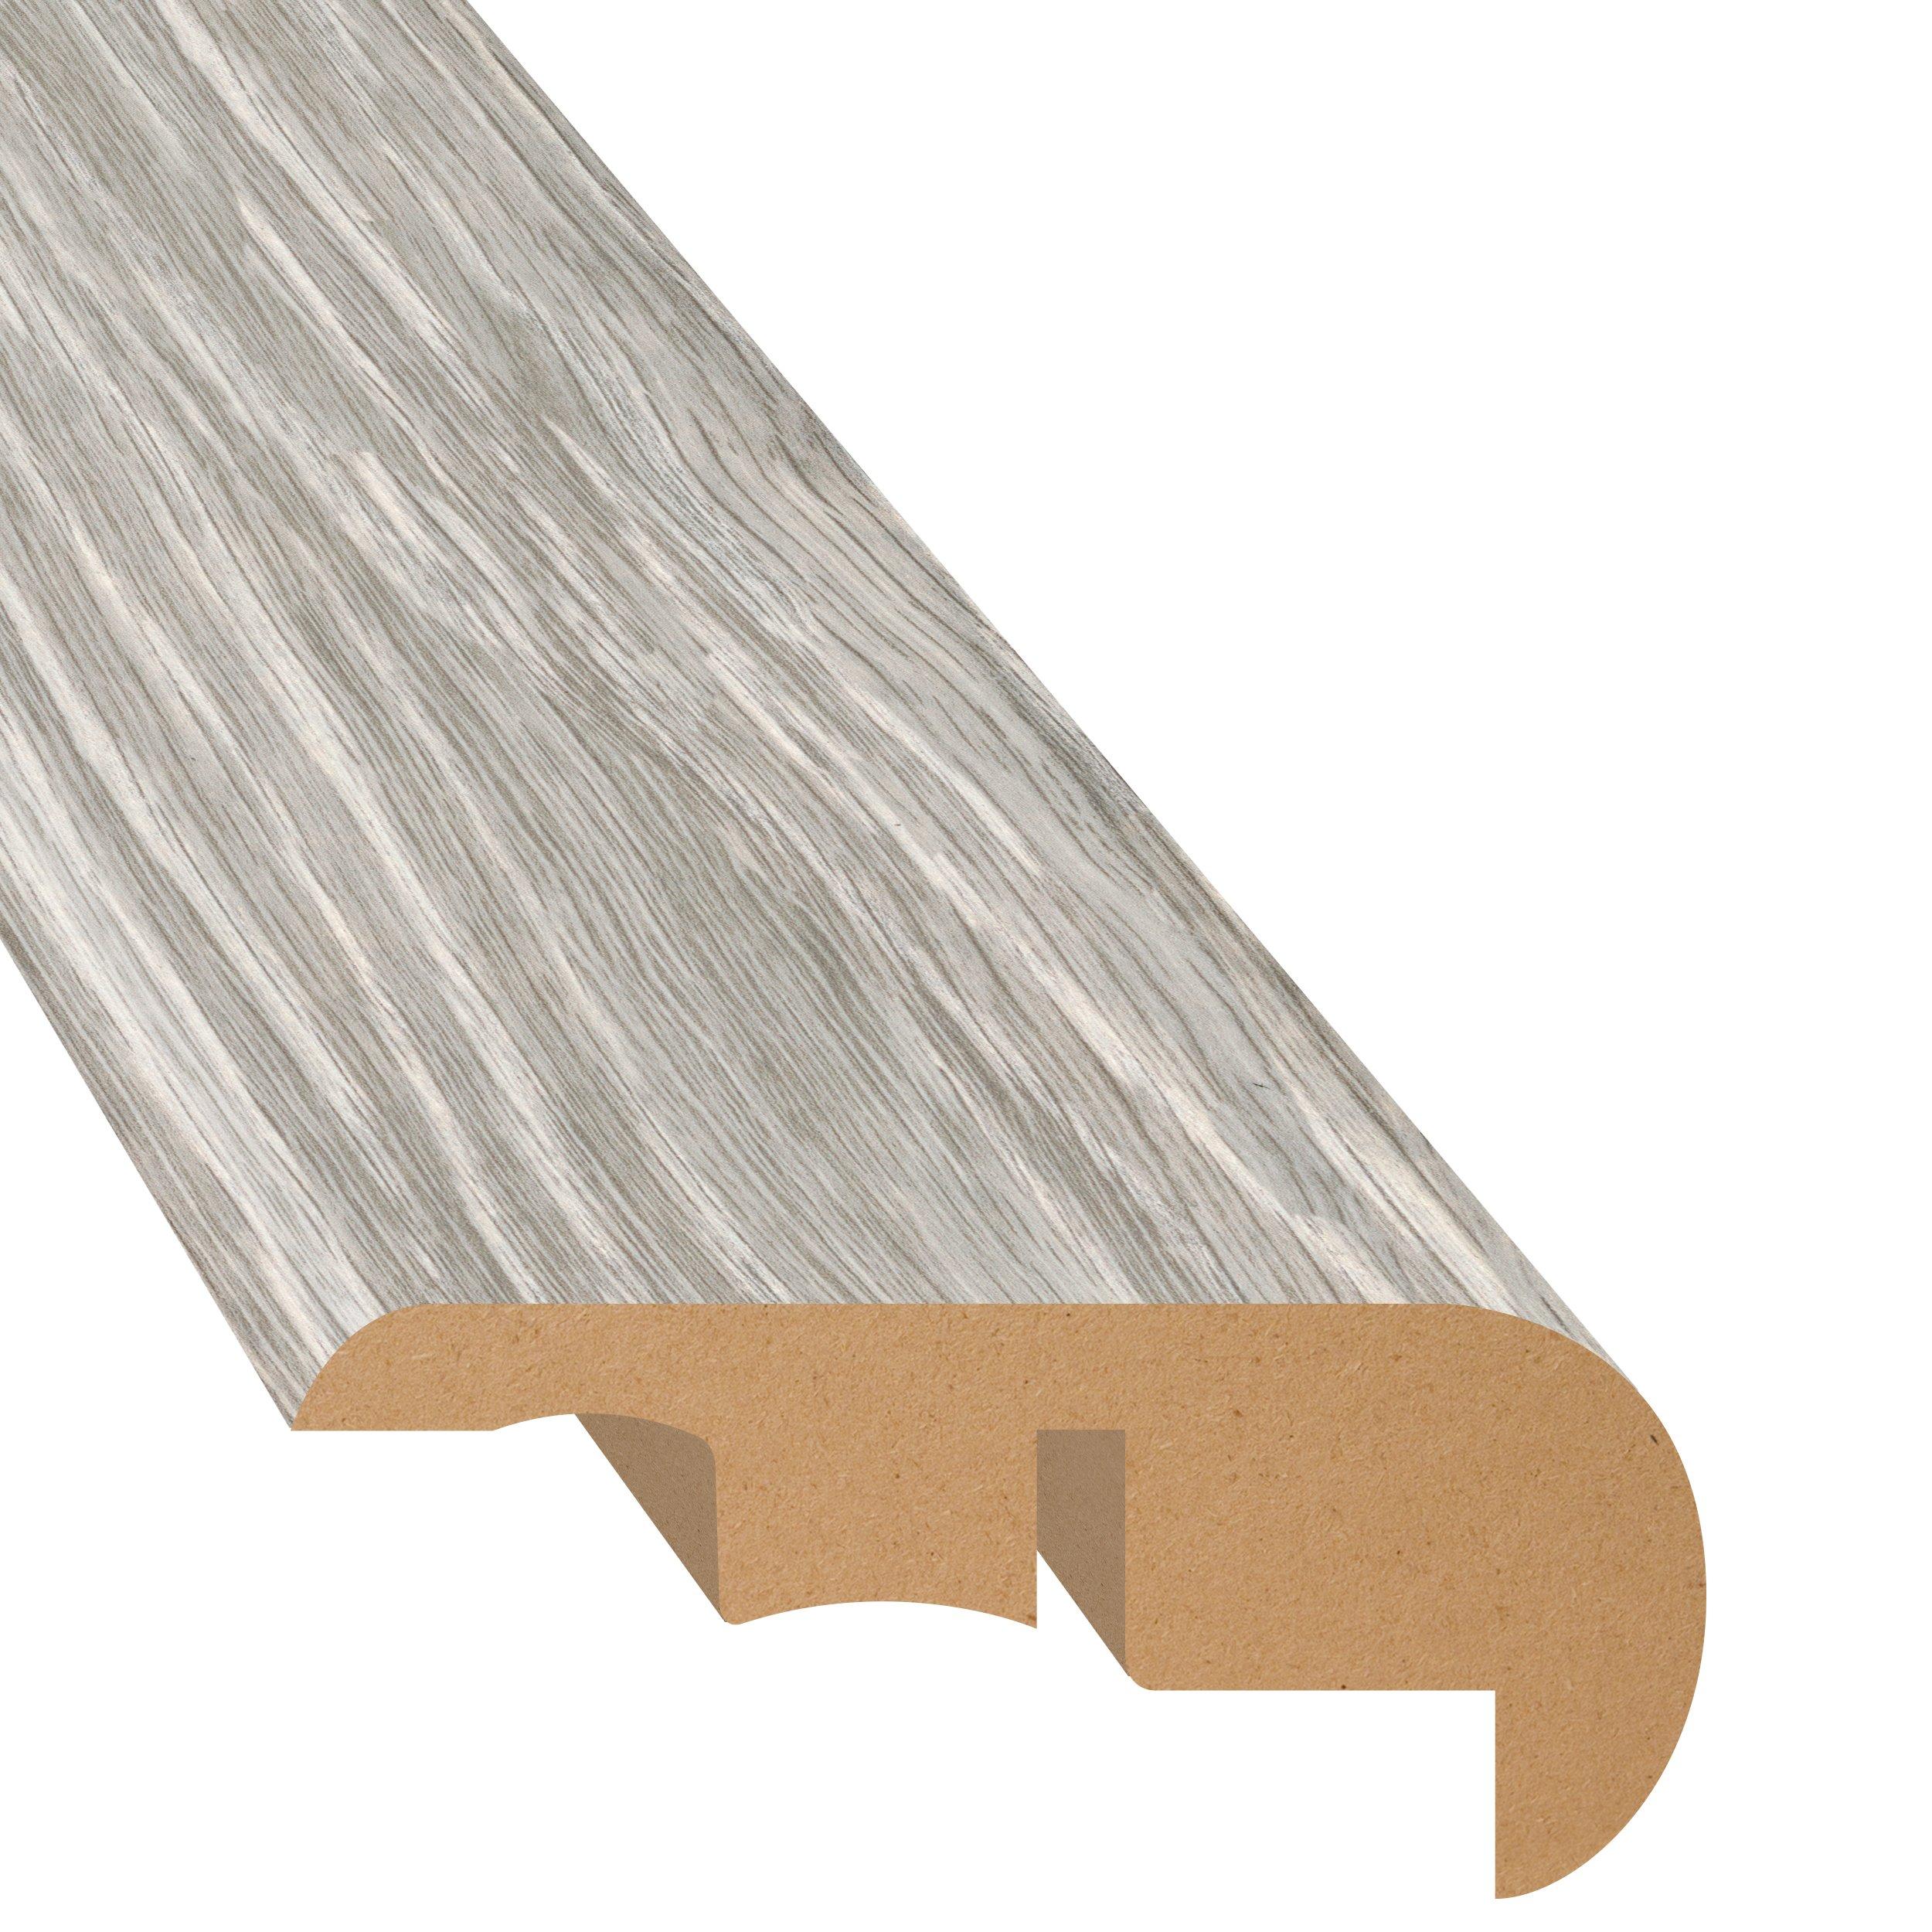 Amelia Oak 94in. Laminate Overlapping Stair Nose